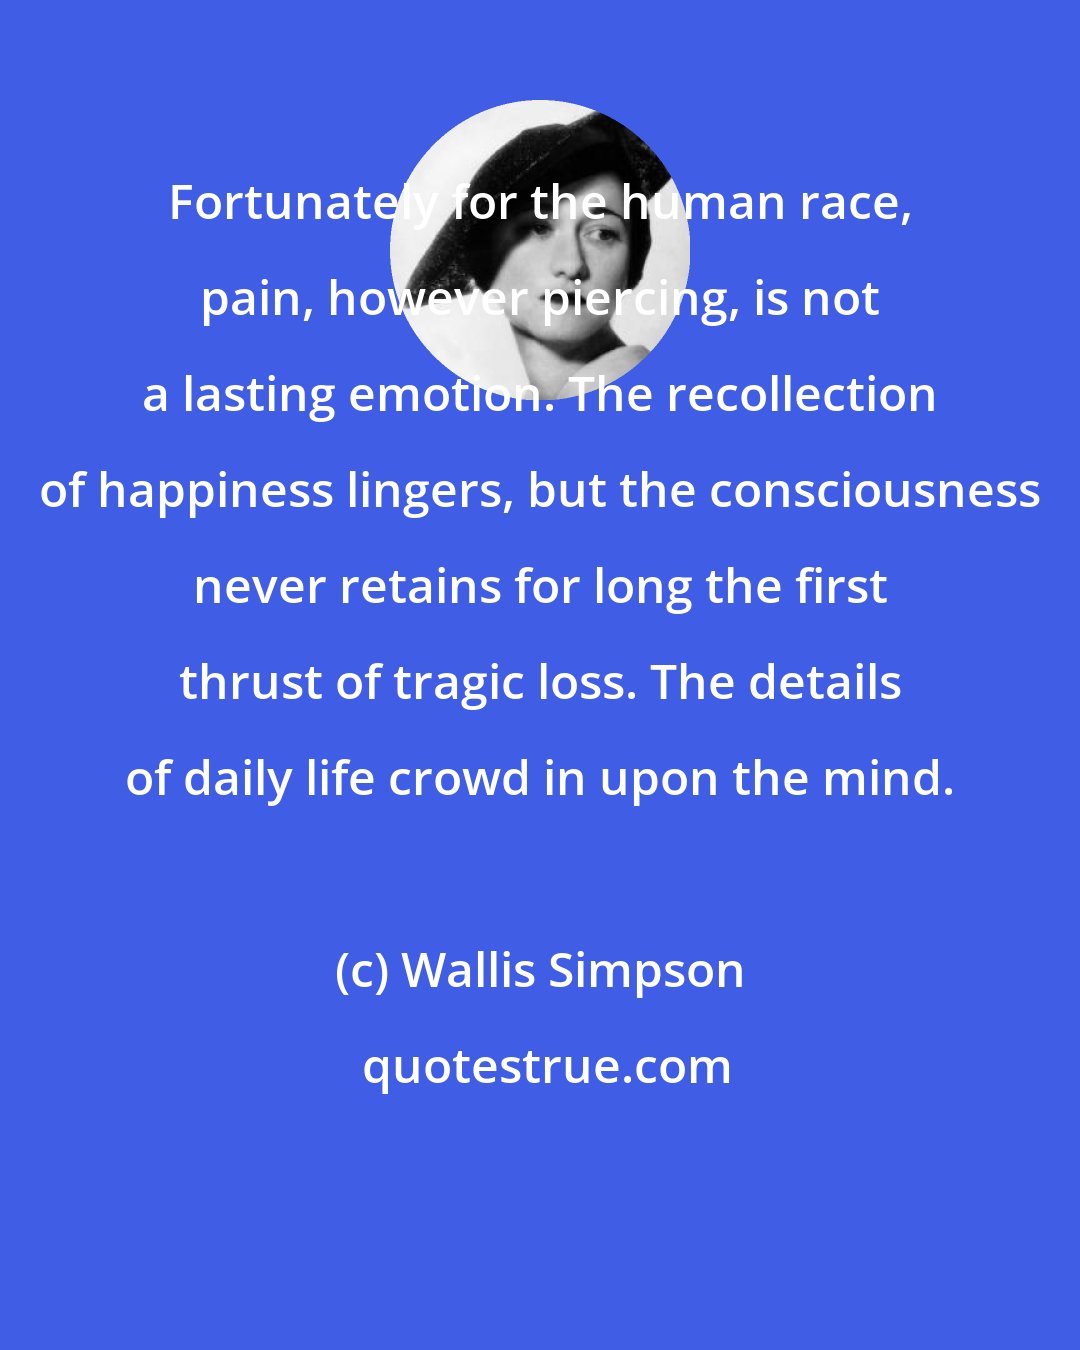 Wallis Simpson: Fortunately for the human race, pain, however piercing, is not a lasting emotion. The recollection of happiness lingers, but the consciousness never retains for long the first thrust of tragic loss. The details of daily life crowd in upon the mind.